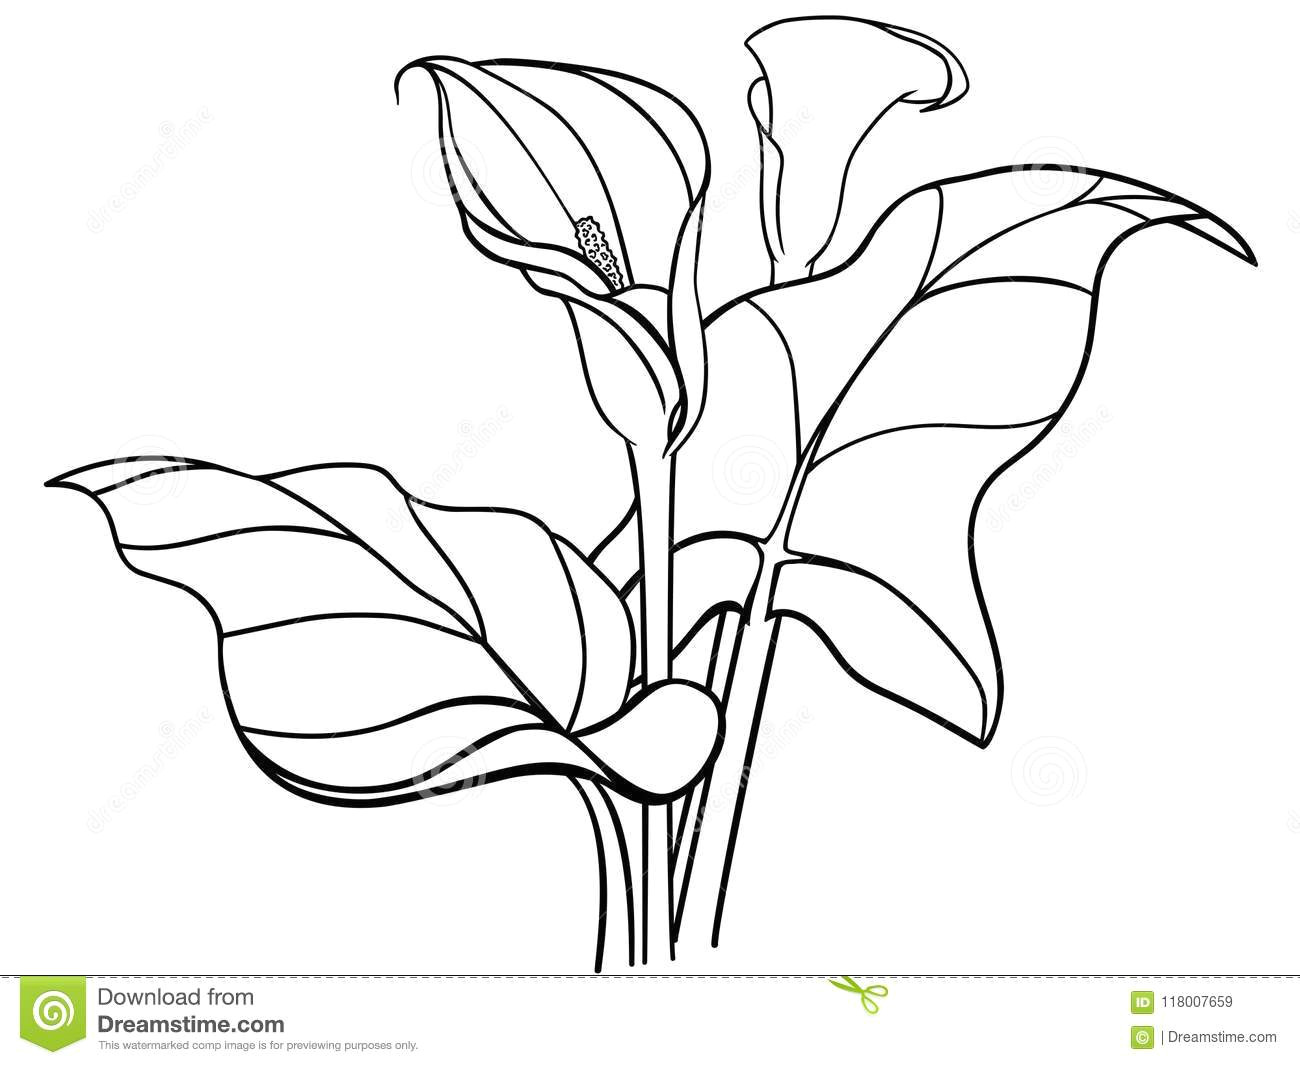 Drawings Of Flowers and Leaves Callas Flowers with Leaves Bouquet White Callas Lilies Line